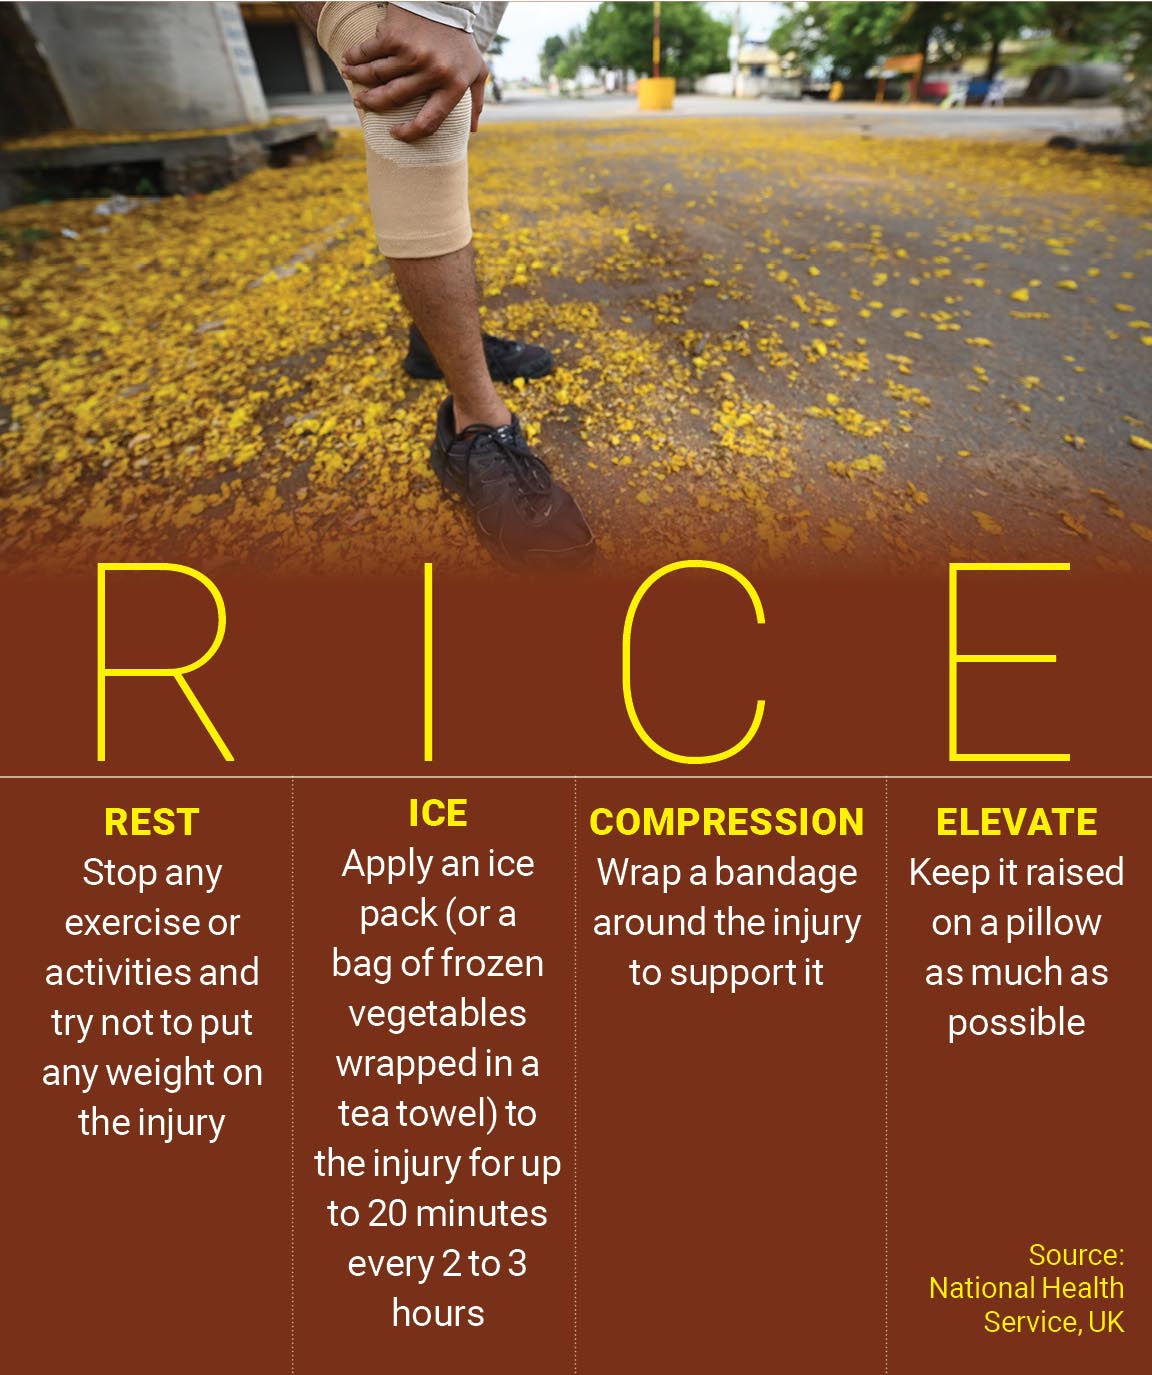 RICE treatment for knee pain